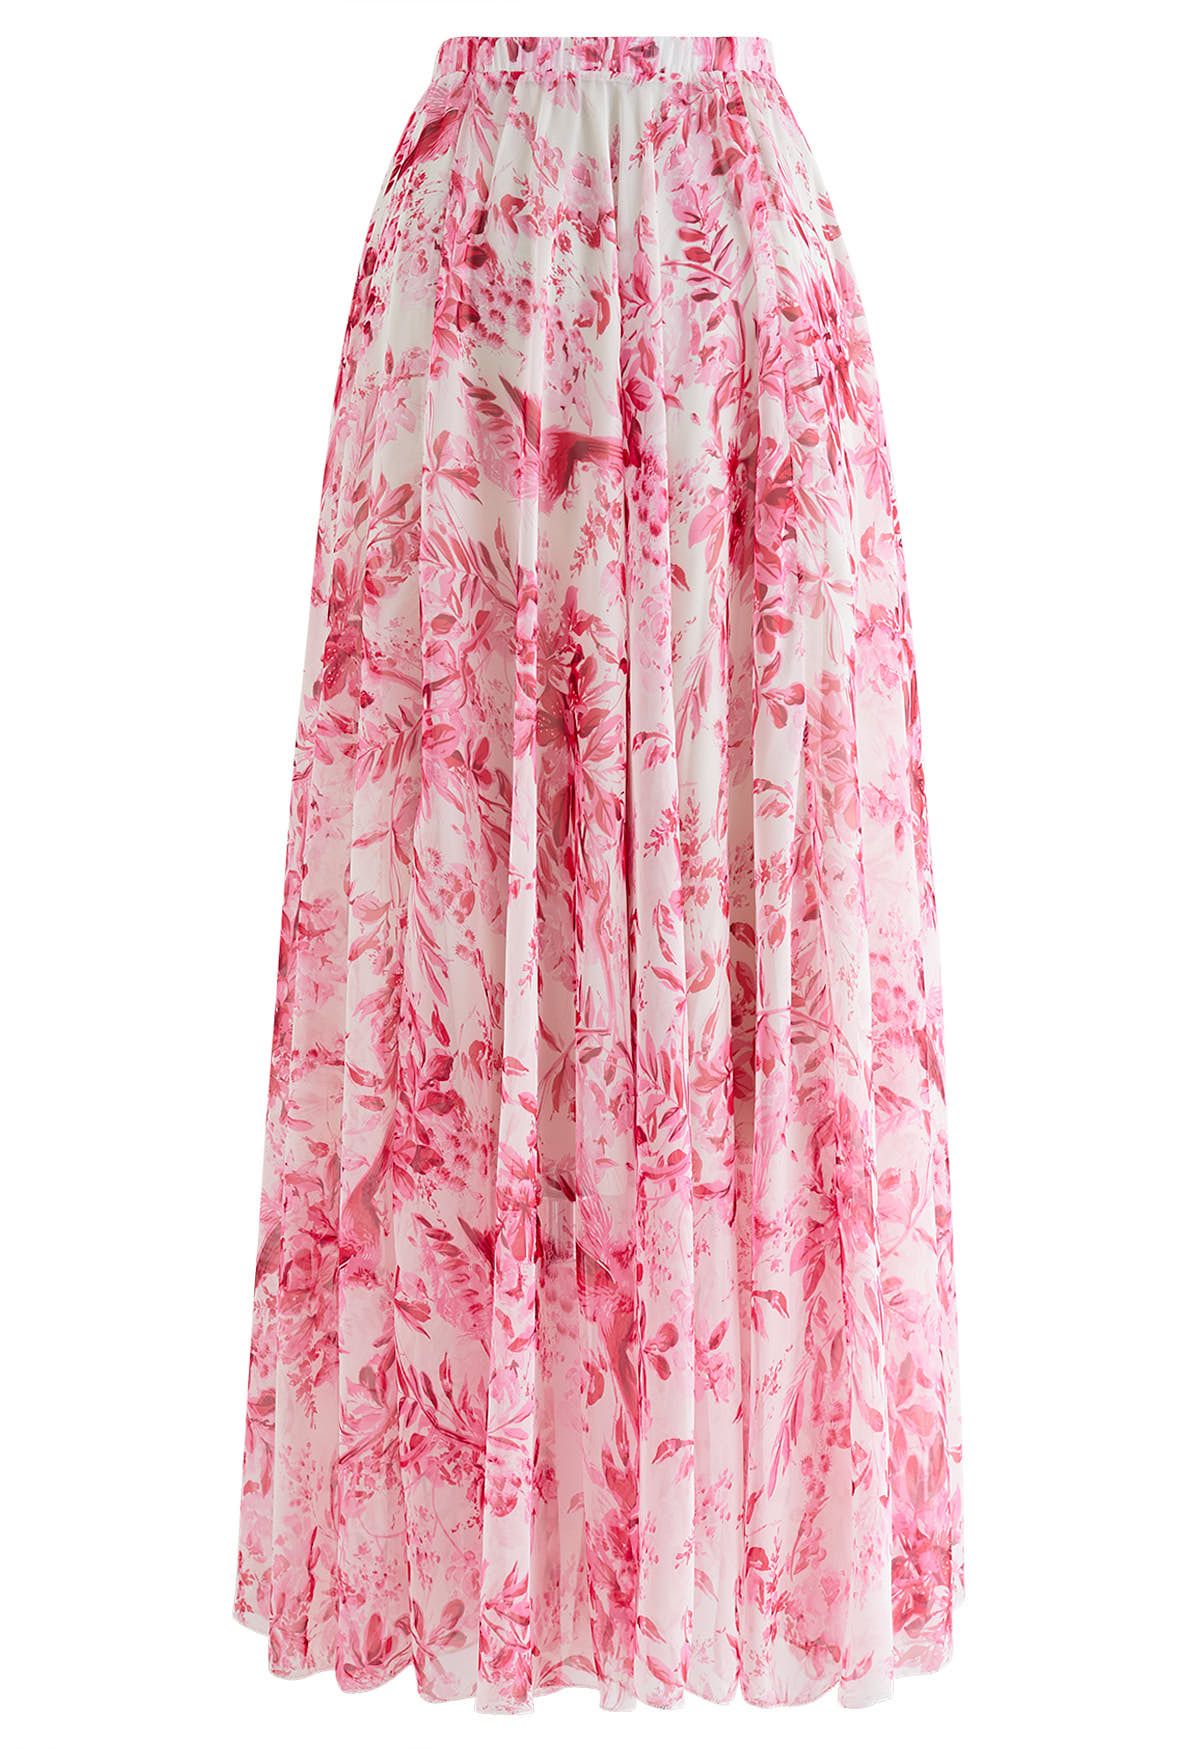 Summer Forest Printed Chiffon Maxi Skirt in Pink - Retro, Indie and ...